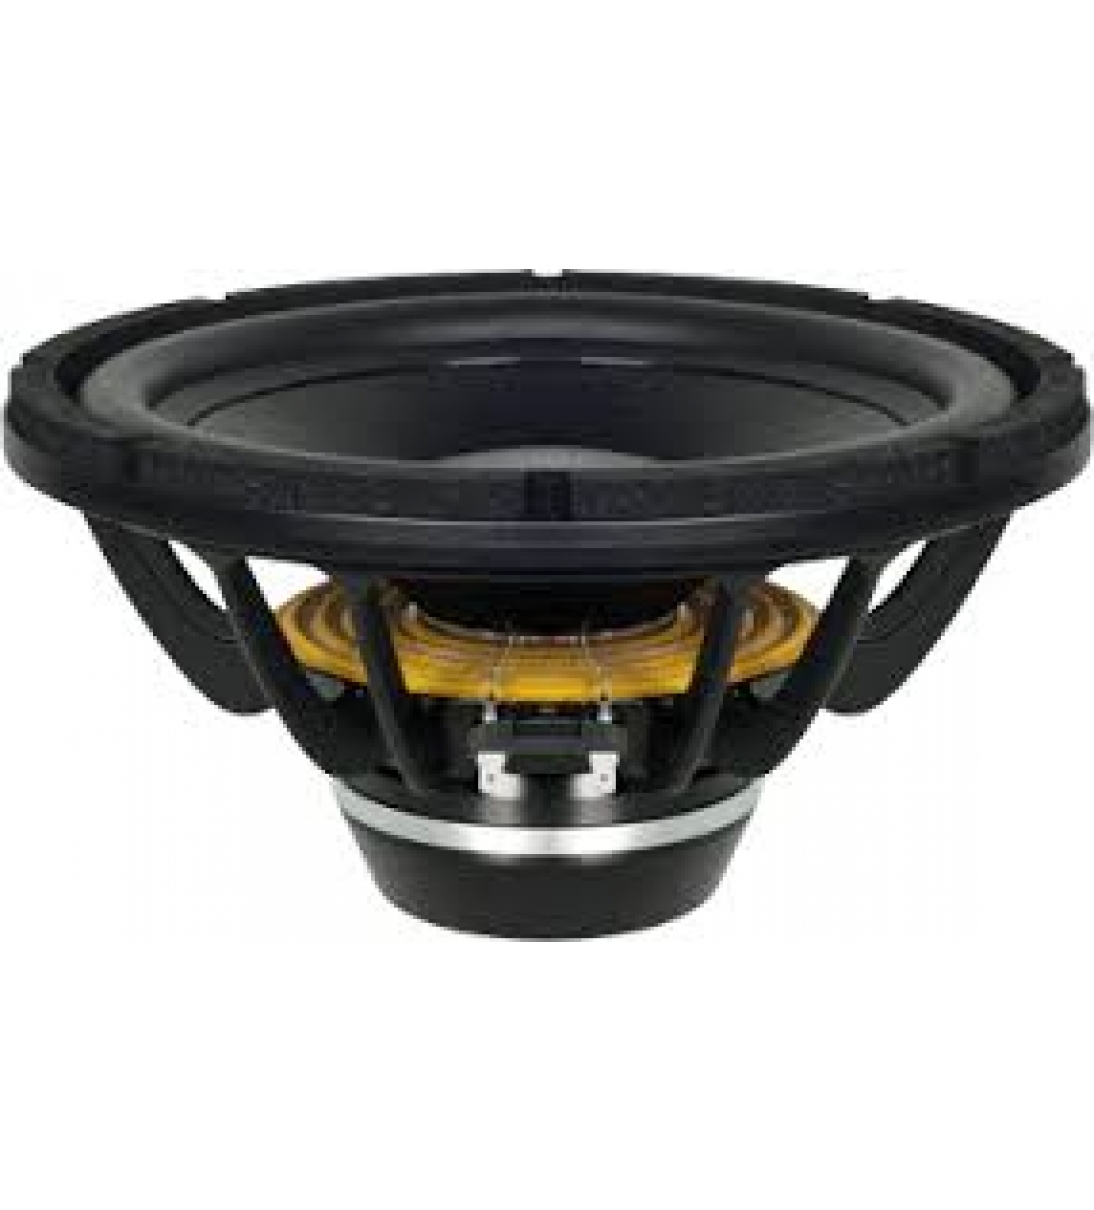 12BG76 LF Drivers 12.0 inches • 1000 W continuous program power capacity